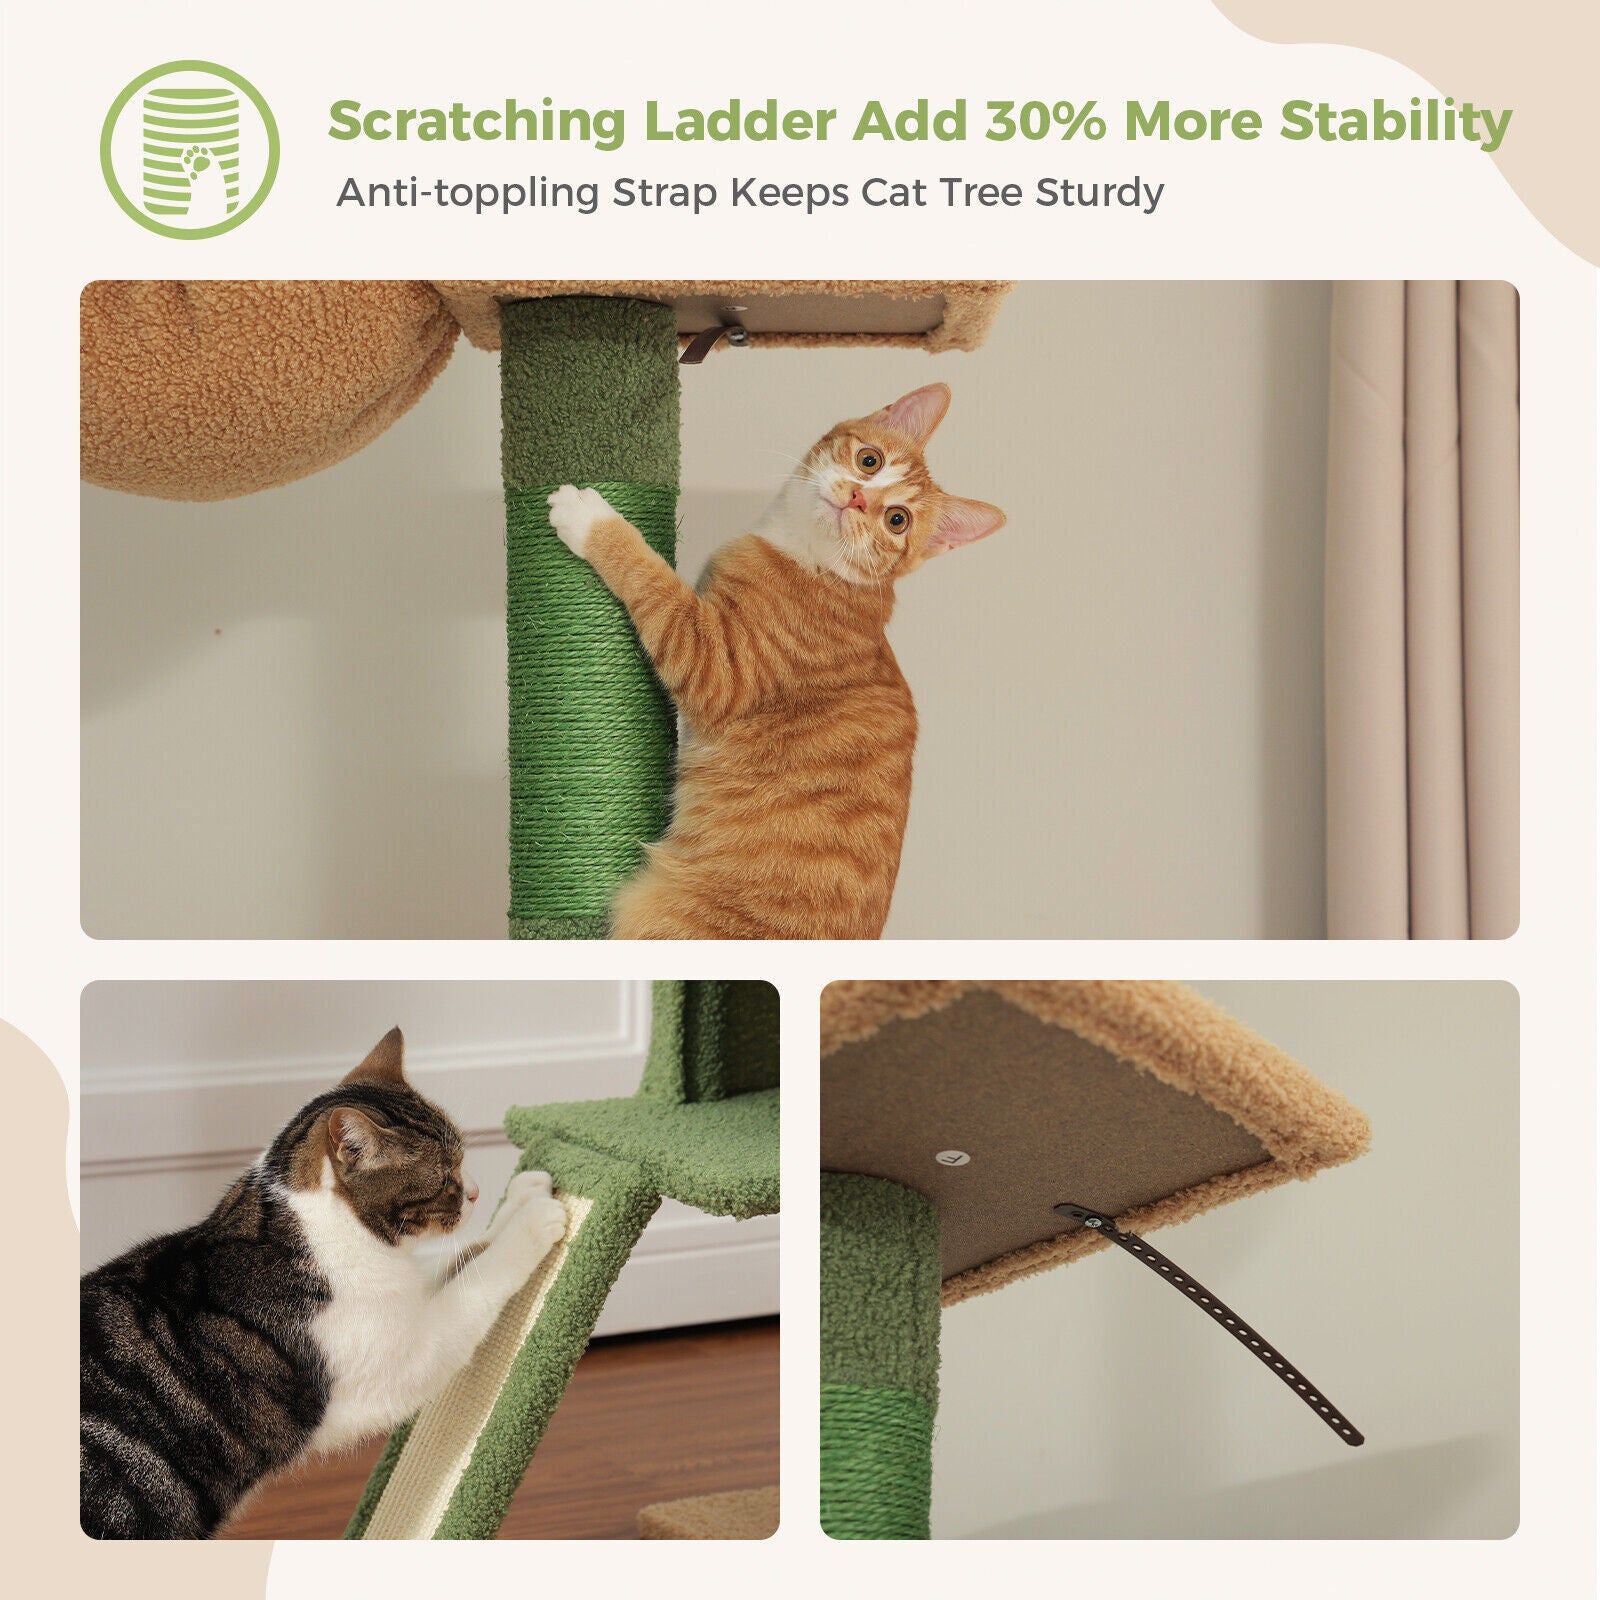 Height Adjustable Cat Tree Tower Scratching Post Ceiling High Cat Scratcher Condo Beds